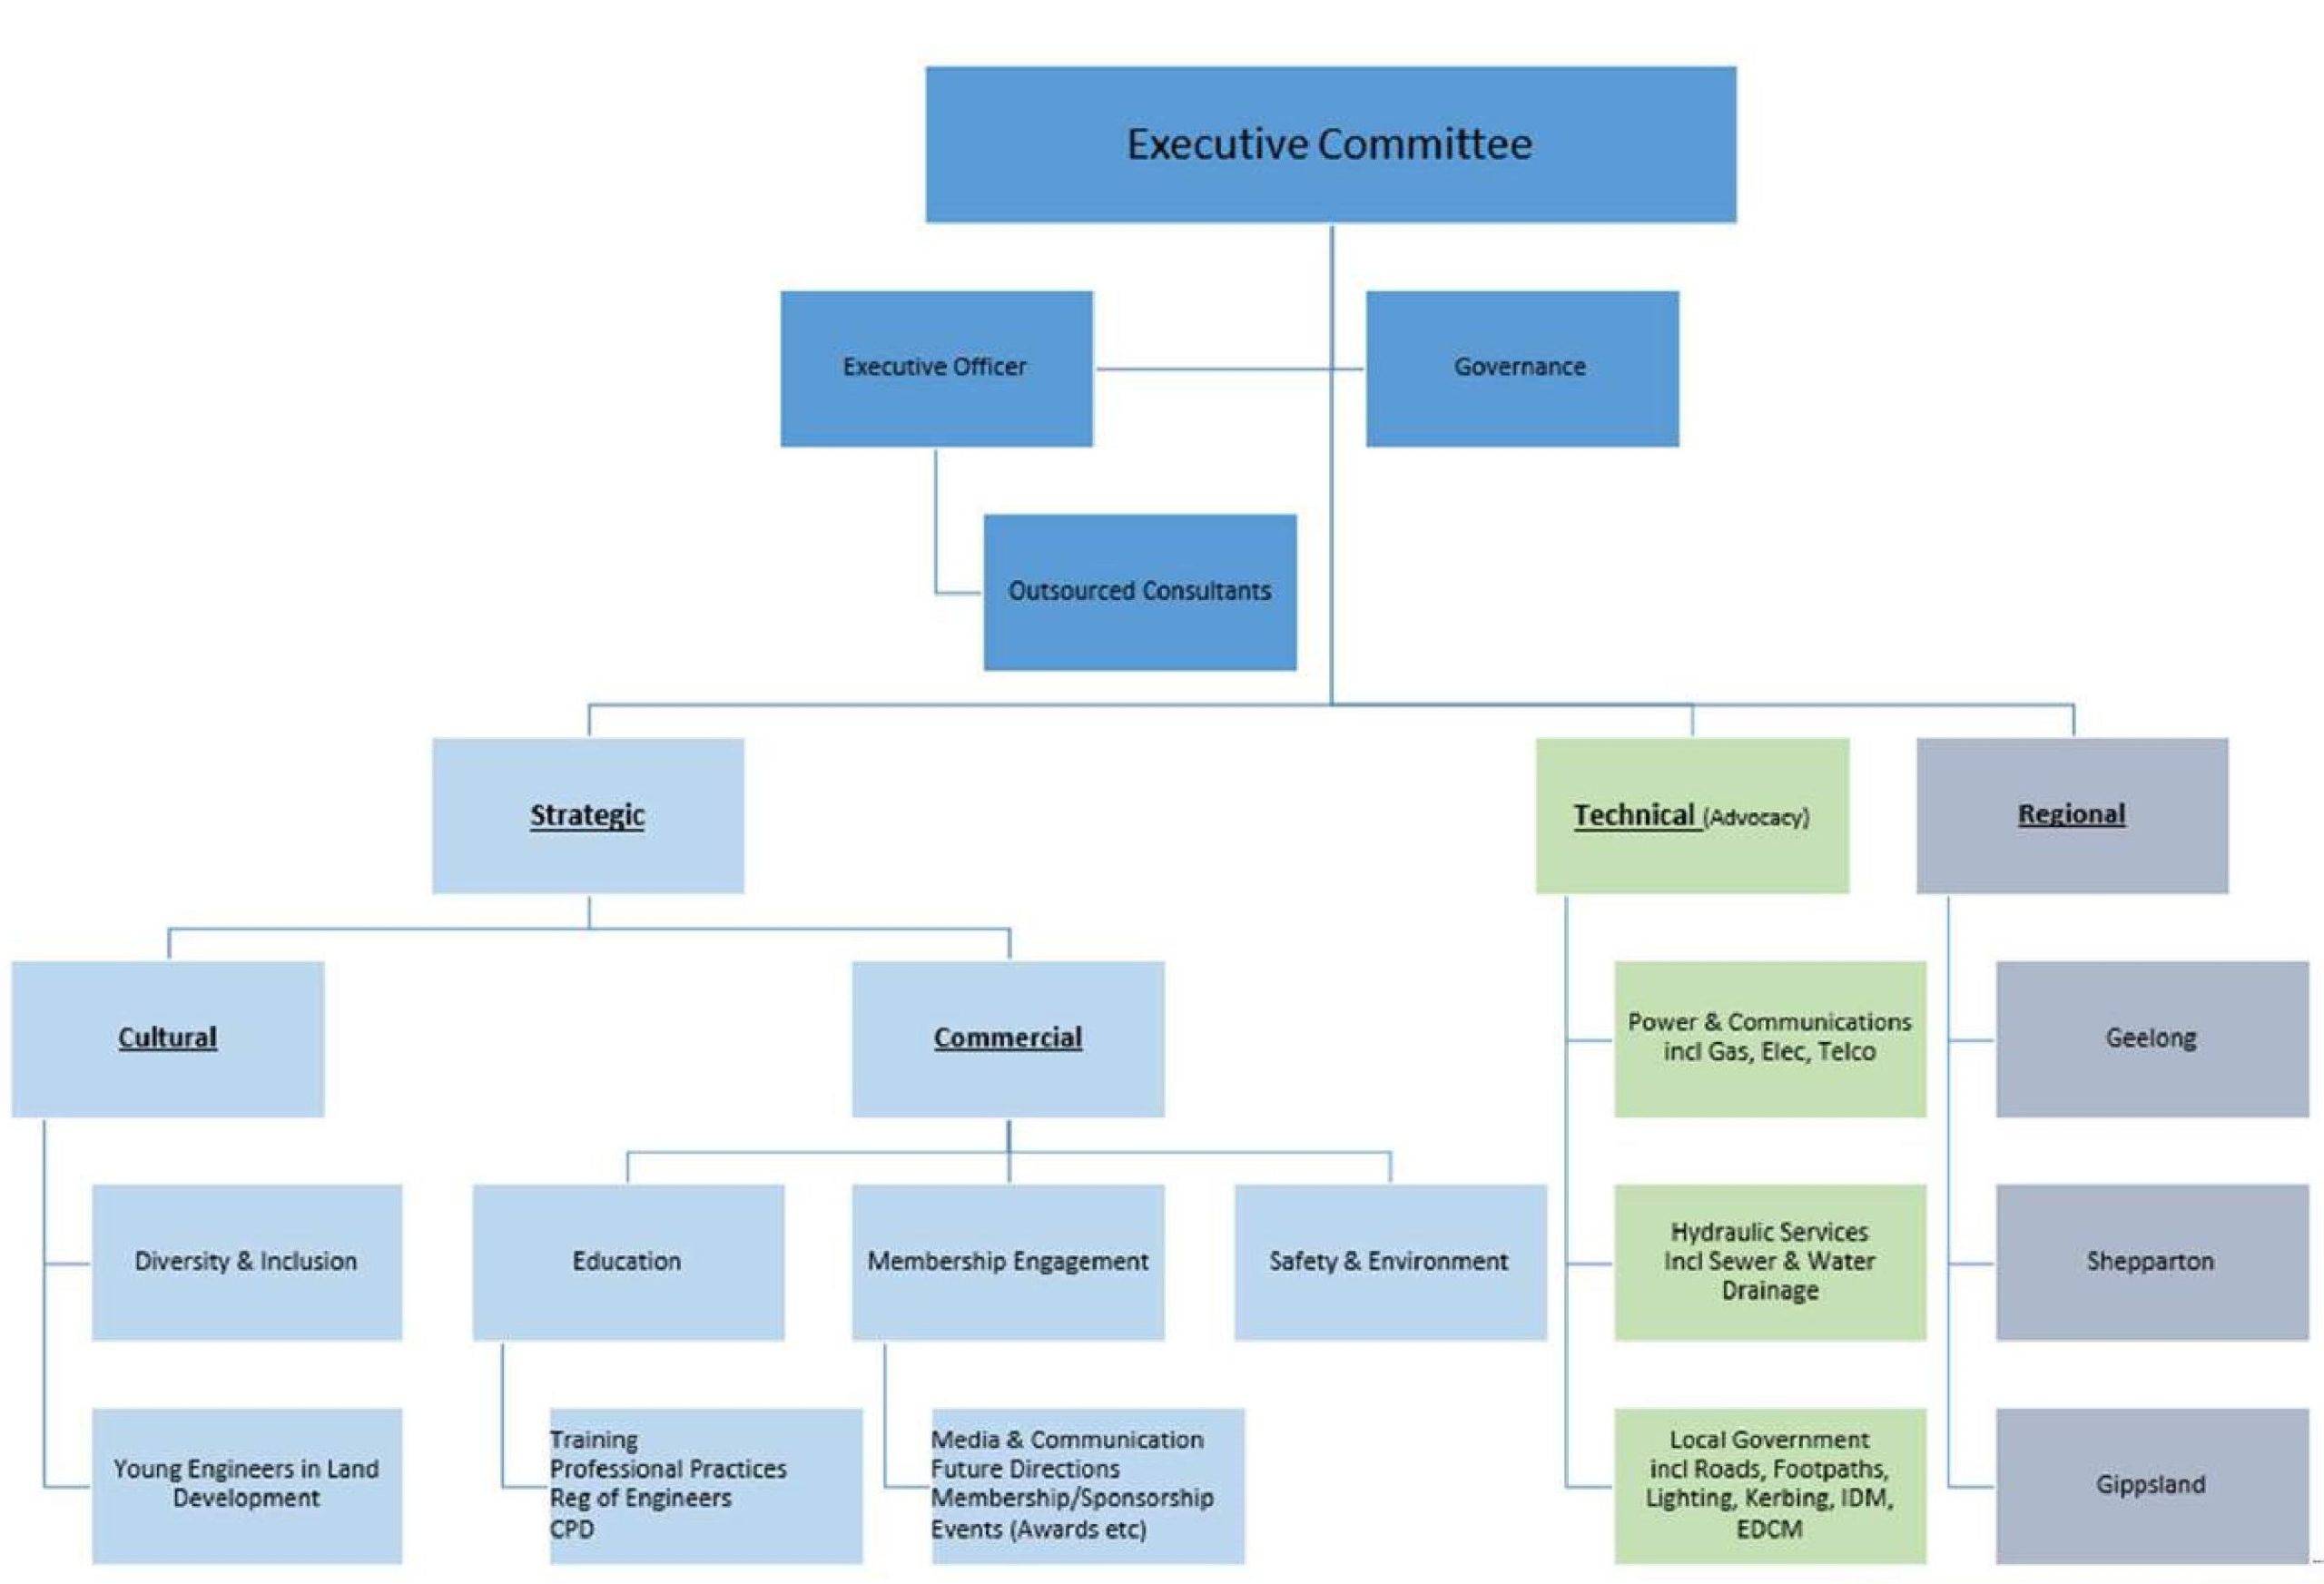 A chart featuring the different levels of the ALDE organisation and the various subcommittees